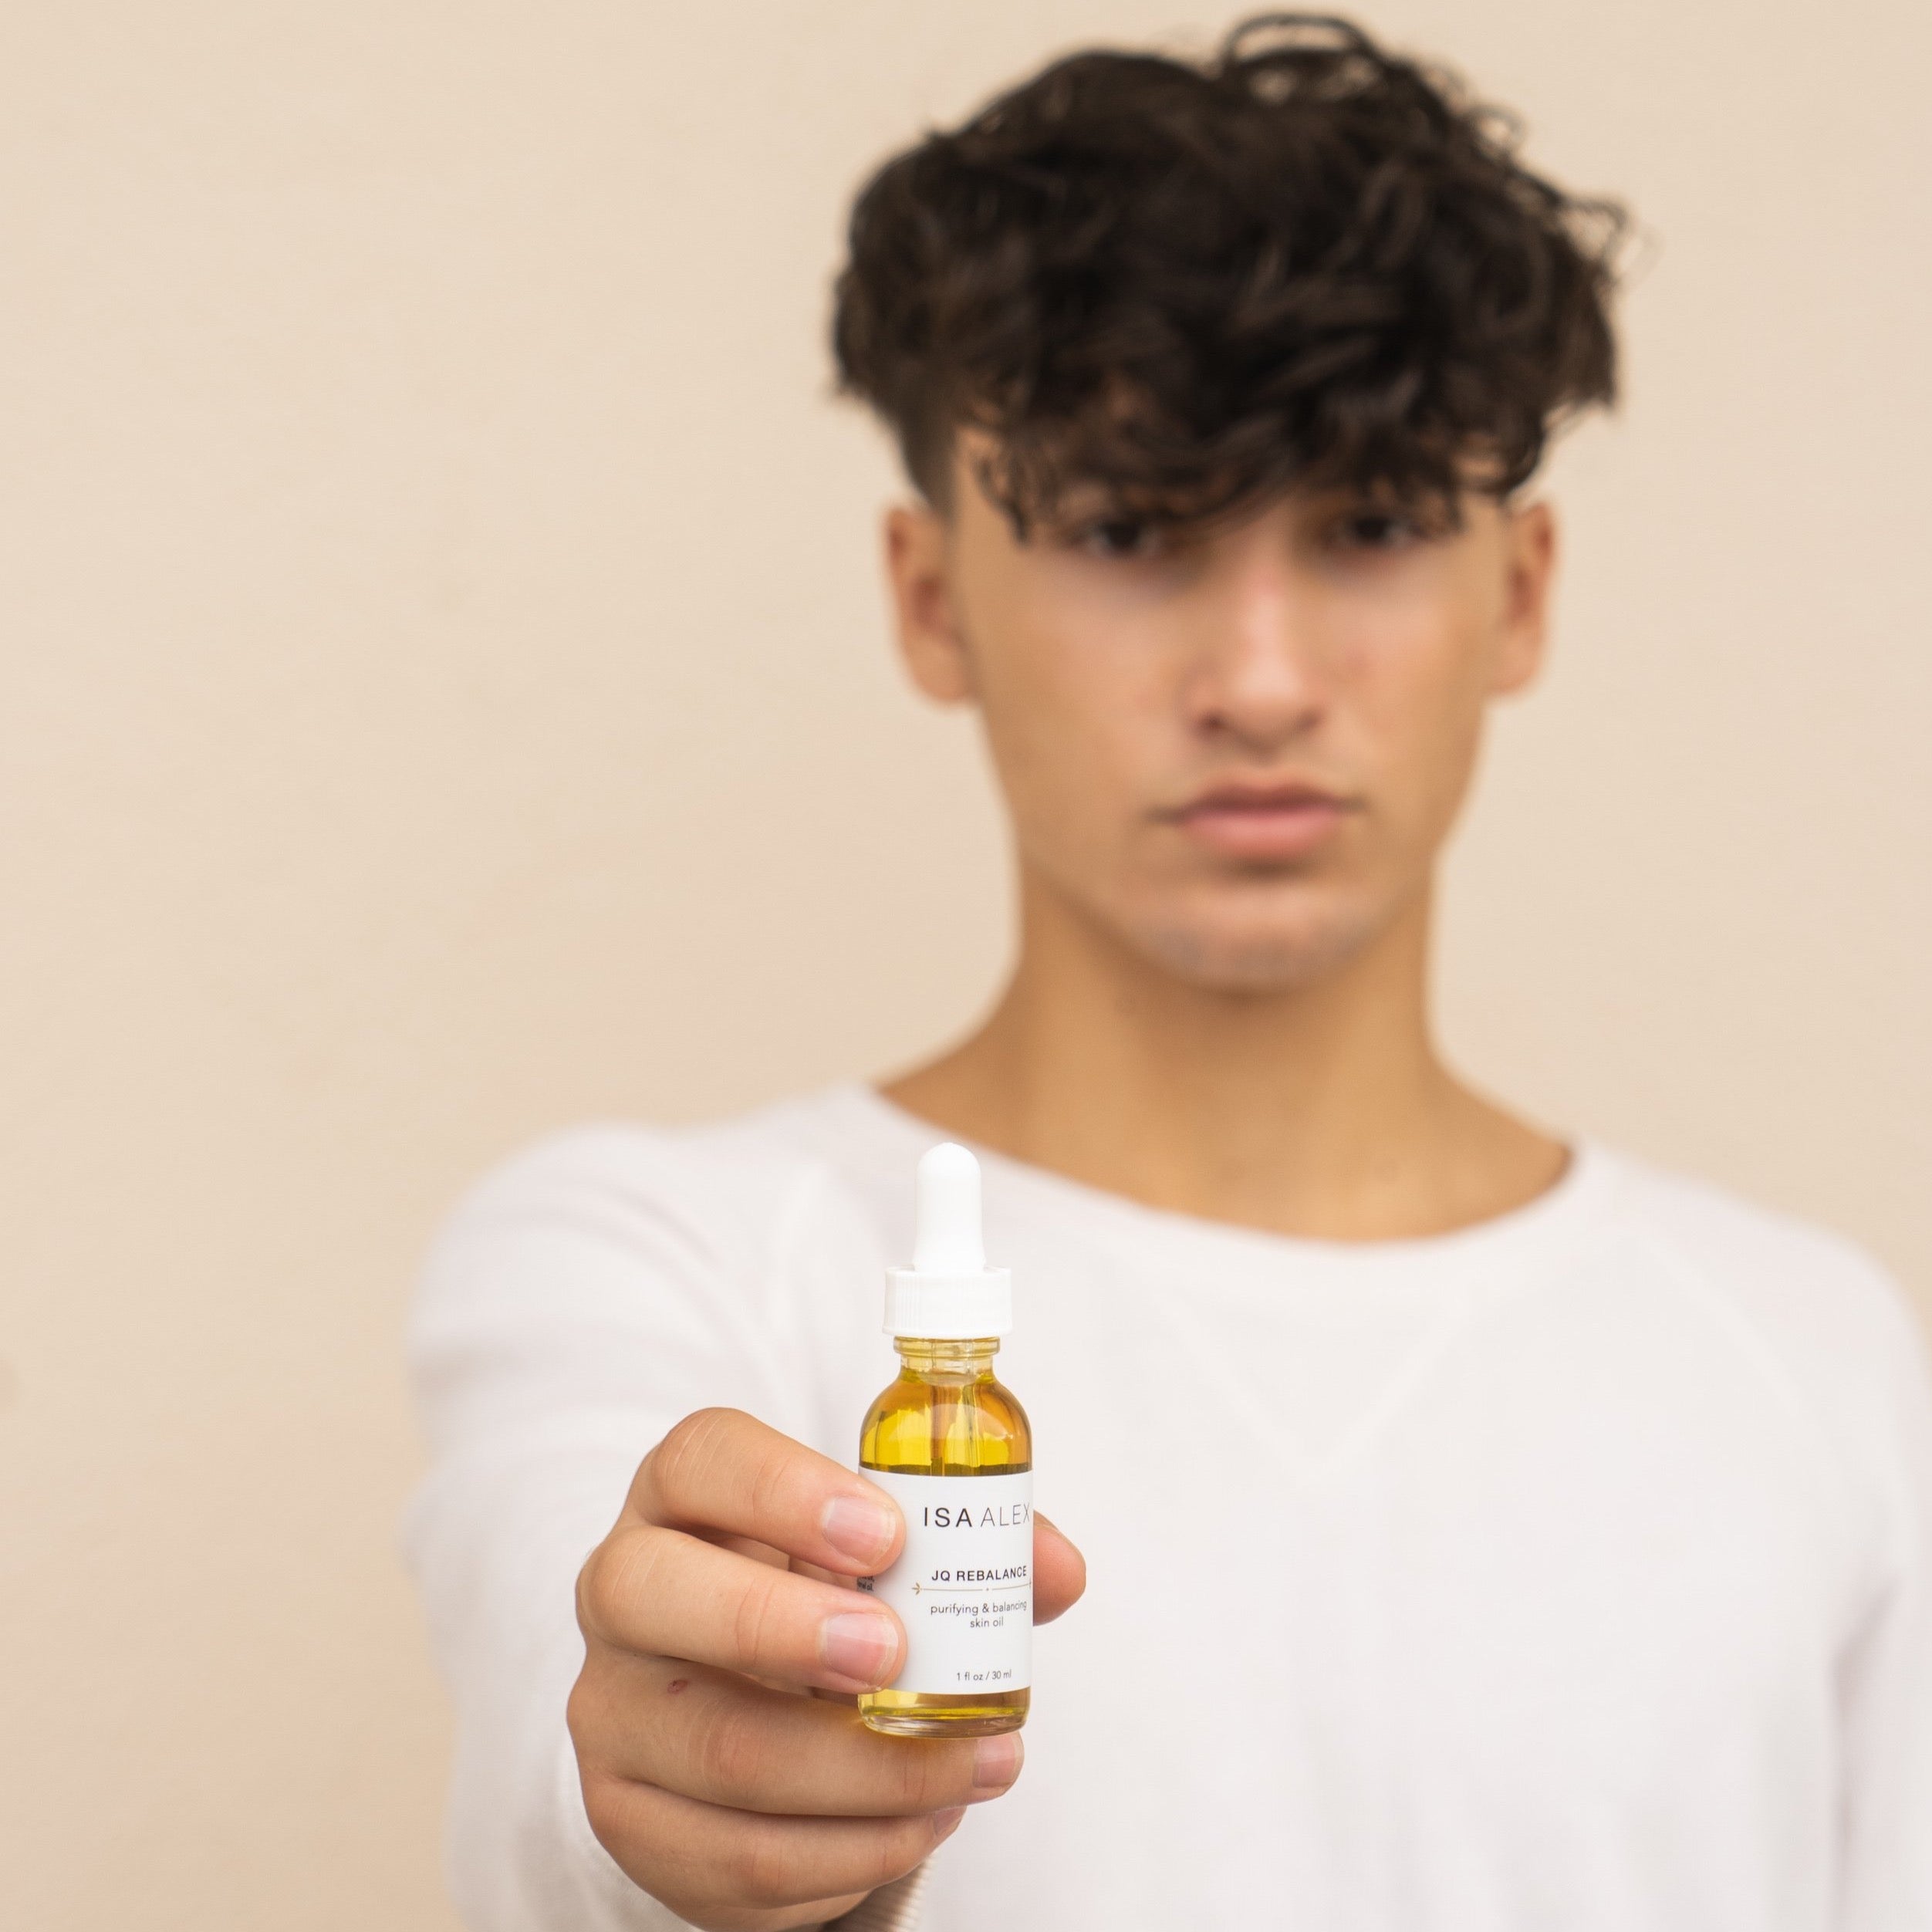 A teen age boy with olive skin, brown hair and dark brown eyes wearing a white long sleeved shirt is seen standing against a light beige colored wall holding out a bottle of skin oil. The bottle is clear with a white label and white dropper so you can see the yellow hue of the skincare oil. The face oil is by ISA ALEX skincare and is called JQ Rebalance Purifying and Rebalancing Face oil. The ambiance of the photo is warm and soft. The teen model is slightly blurred in the background.